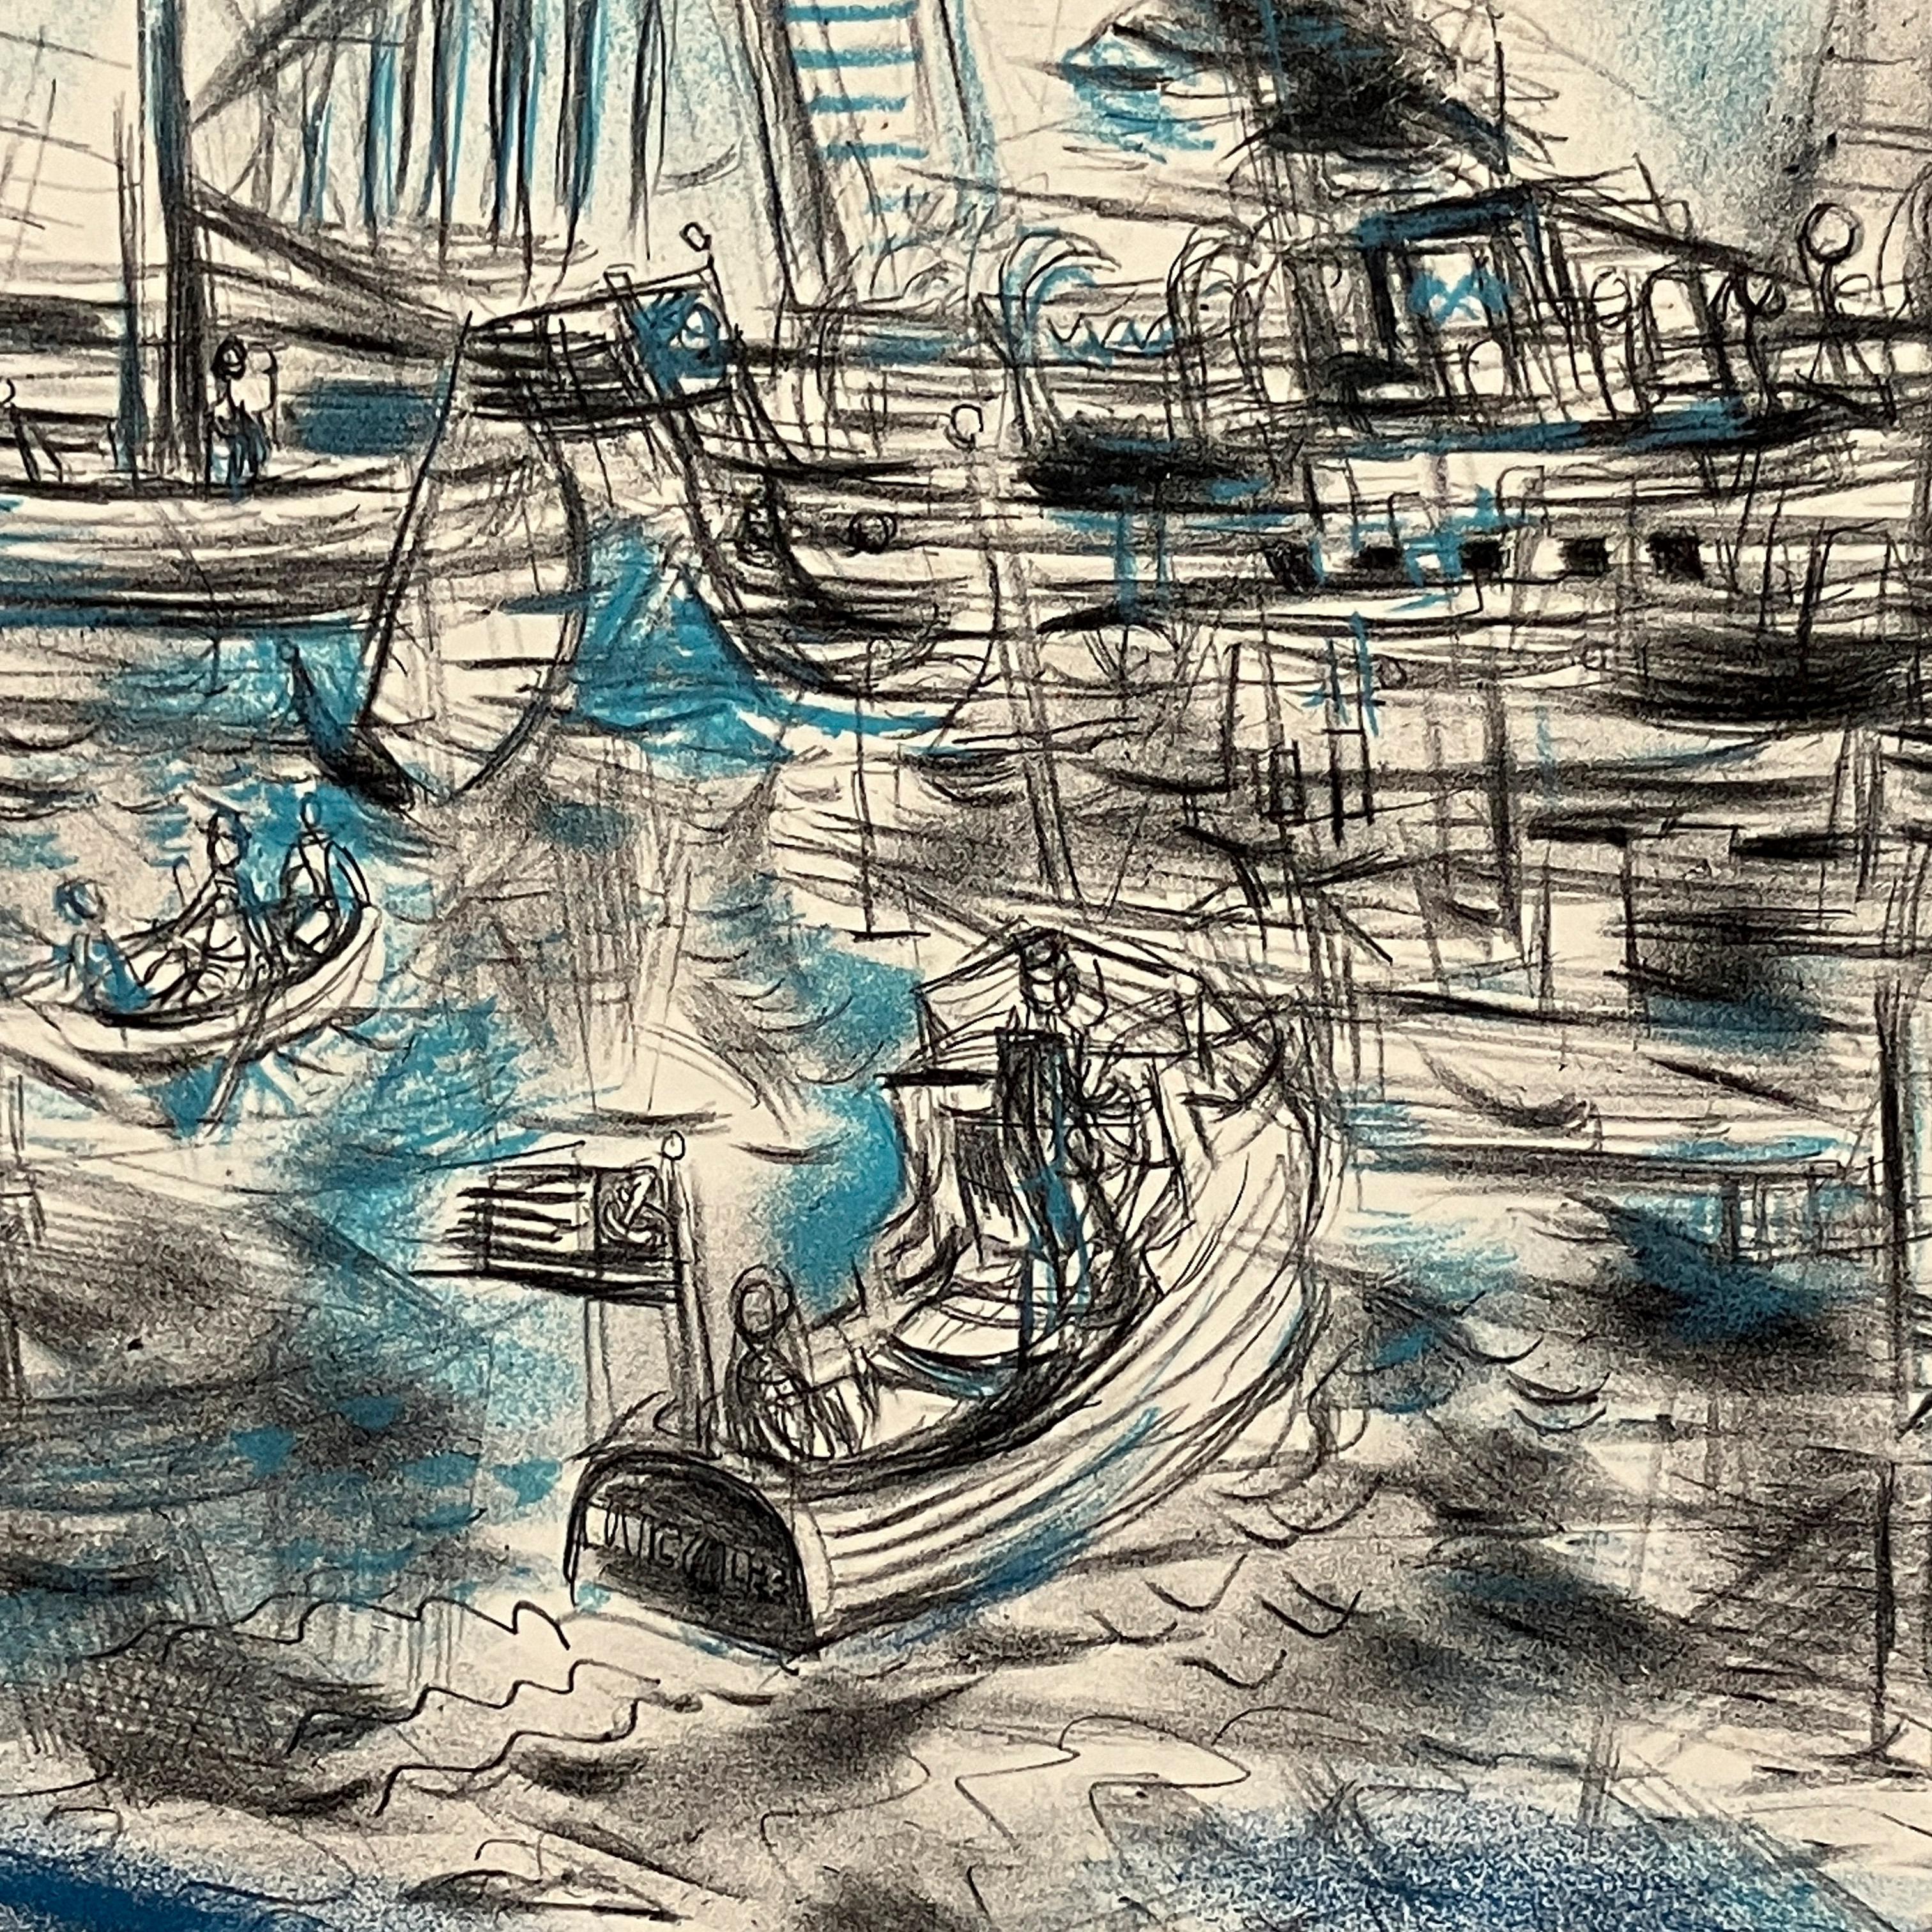 A lithograph with pastel depicting the Edgartown Harbor on Martha's Vineyard by Francis Chapin, from around 1958.

Francis Chapin, affectionately called the “Dean of Chicago Painters” by his colleagues, was one of the city’s most popular and